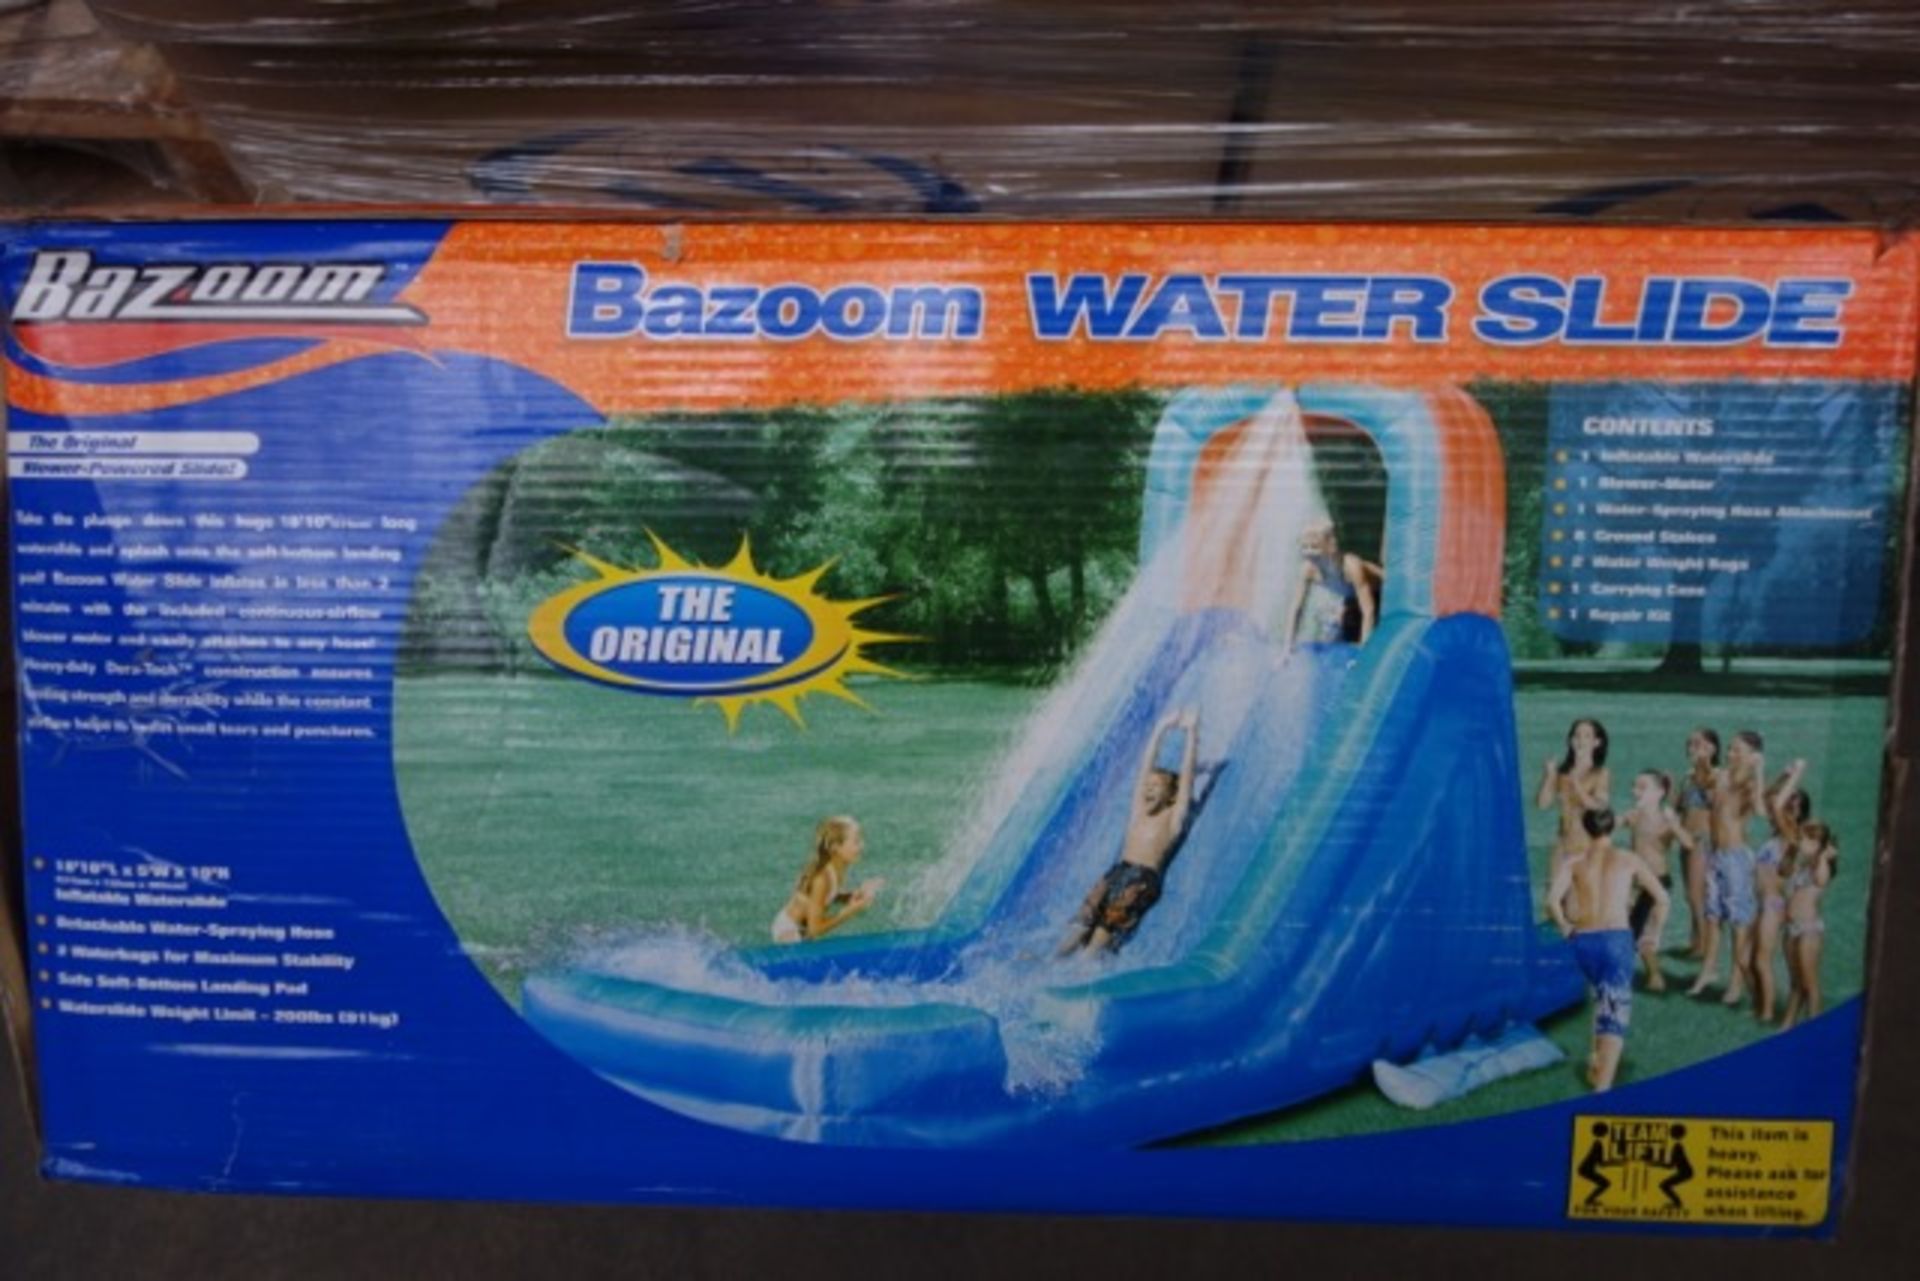 1 x Bazoon Extra Large Water Slide Complete with Pump. RRP £399.99. Huge 18 foot 10 inch long.